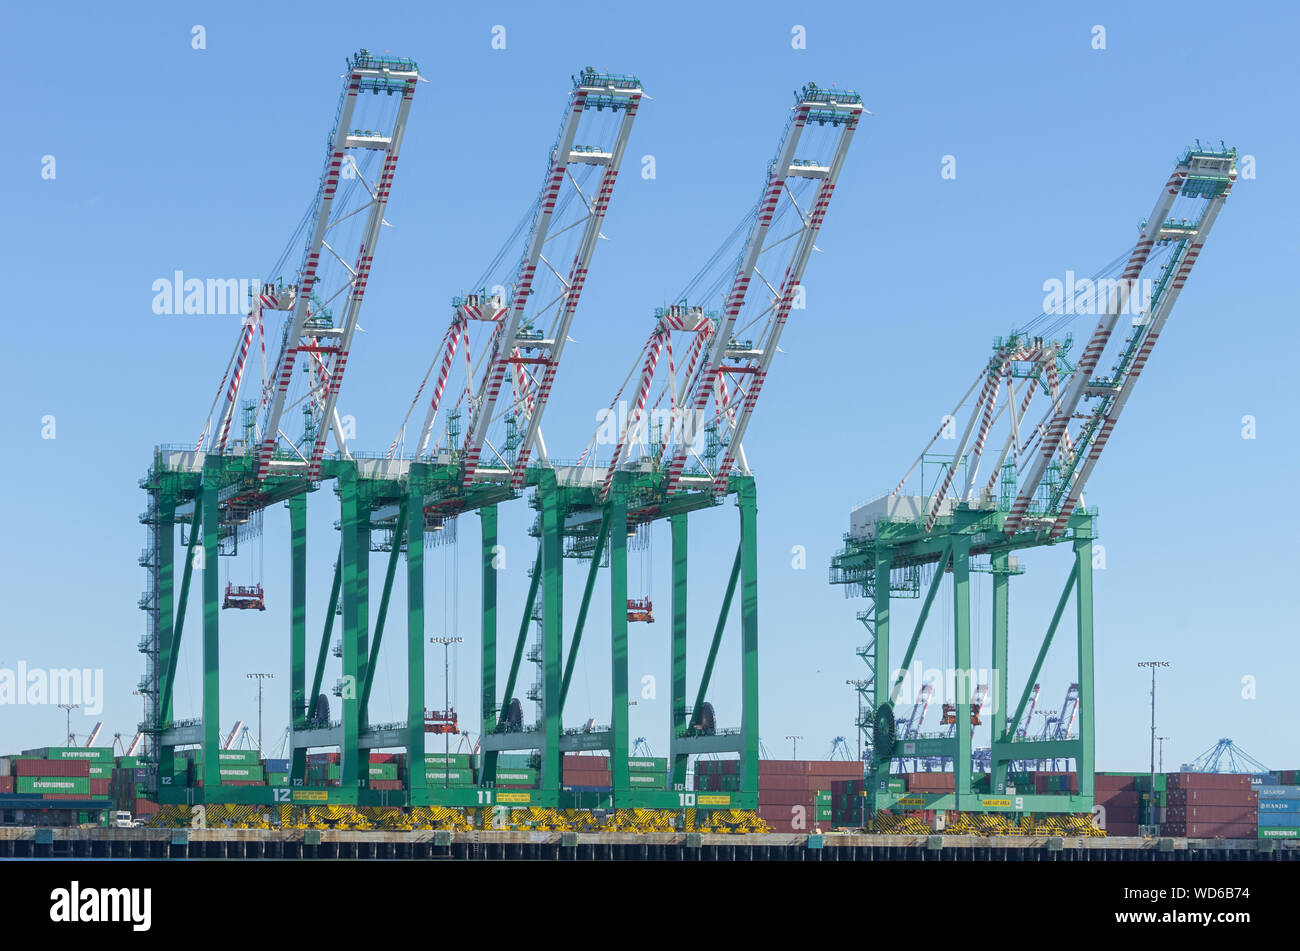 Image showing a number of Evergreen Marine Corporation cranes and containers at the Port of Los Angeles. Stock Photo